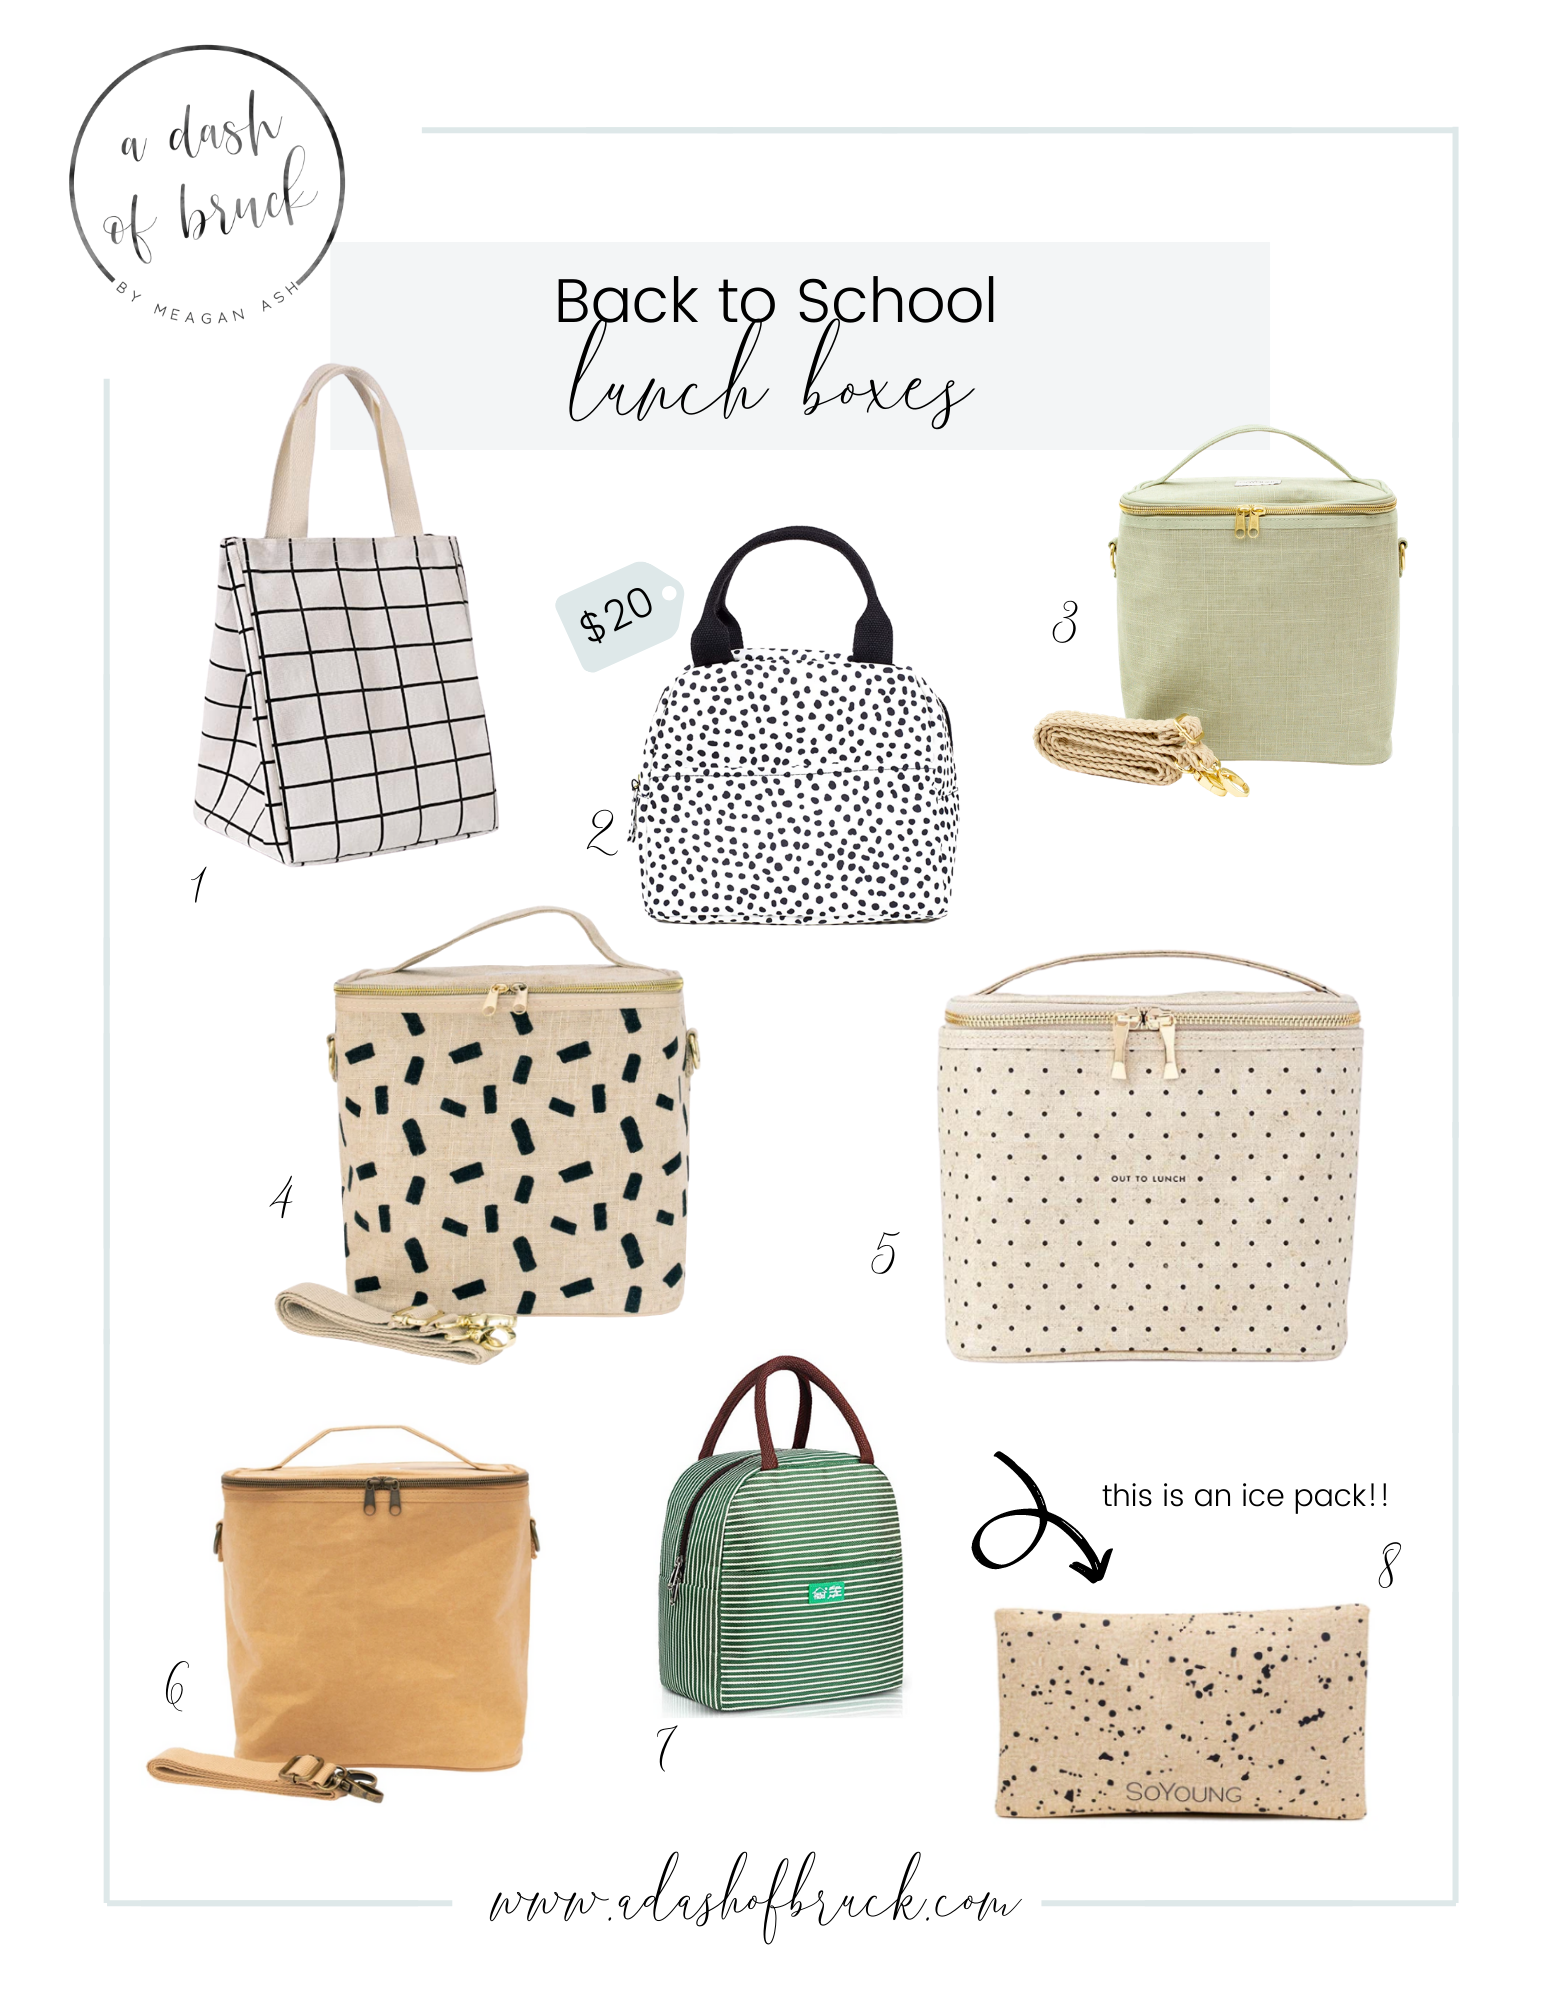 Back to School Lunch Boxes - A Dash of Bruck